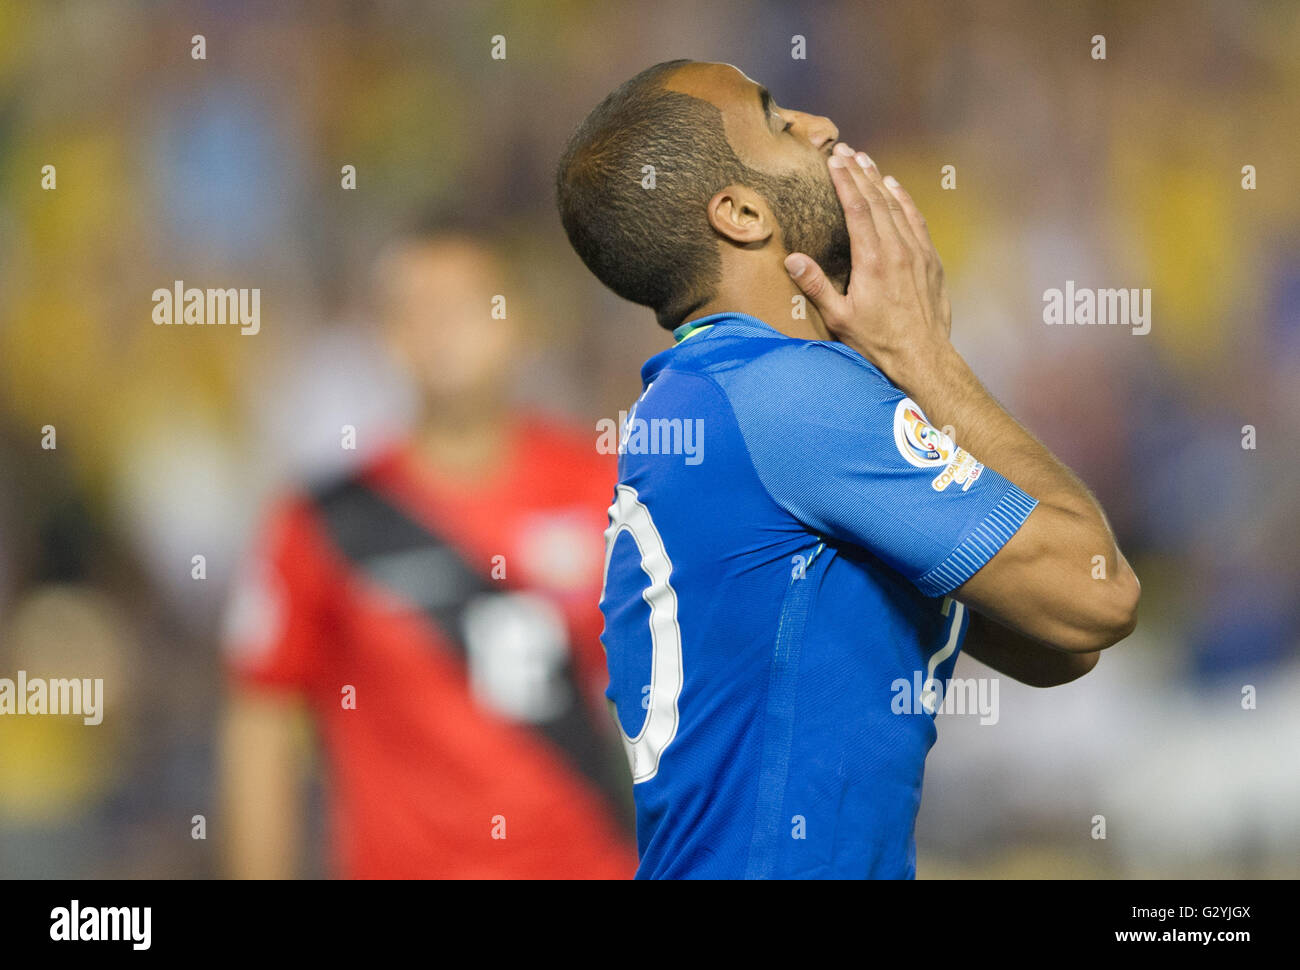 Pasadena, USA. 4th June, 2016. Lucas Lima of Brazil reacts during the 2016 Copa America Centenario Group B match against Ecuador in Pasadena, the United States, June 4, 2016. The match ended with a 0-0 draw. © Yang Lei/Xinhua/Alamy Live News Stock Photo